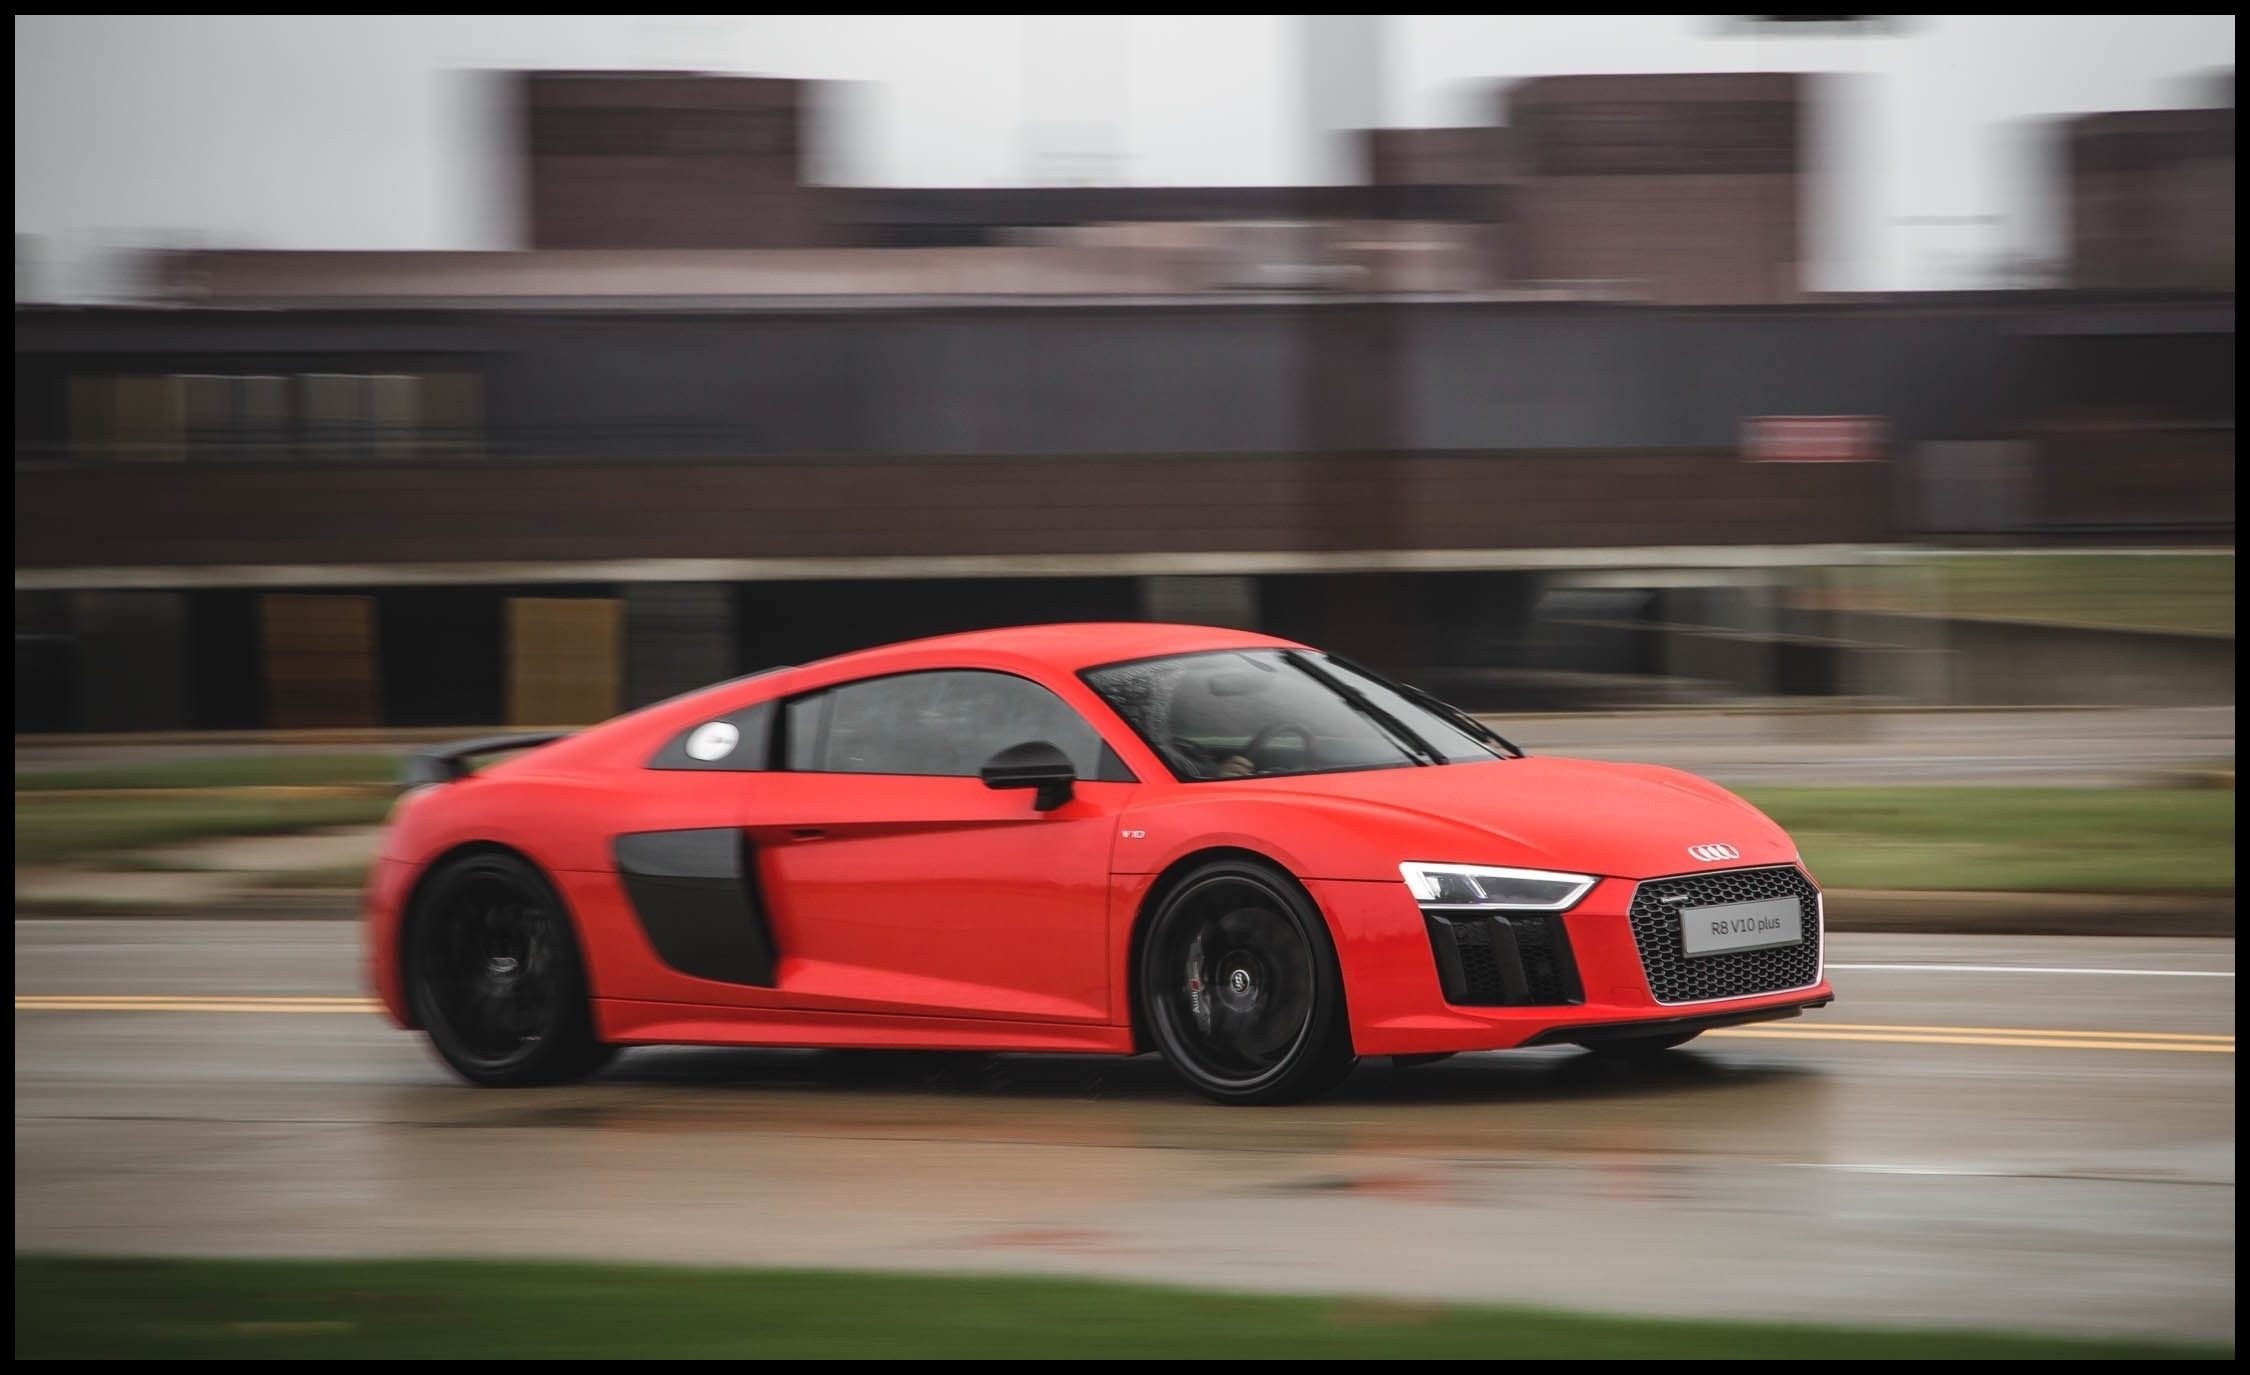 Download Fresh Audi R8 V10 0 60 with original resolution 2250x1375 px size 157 KB Here